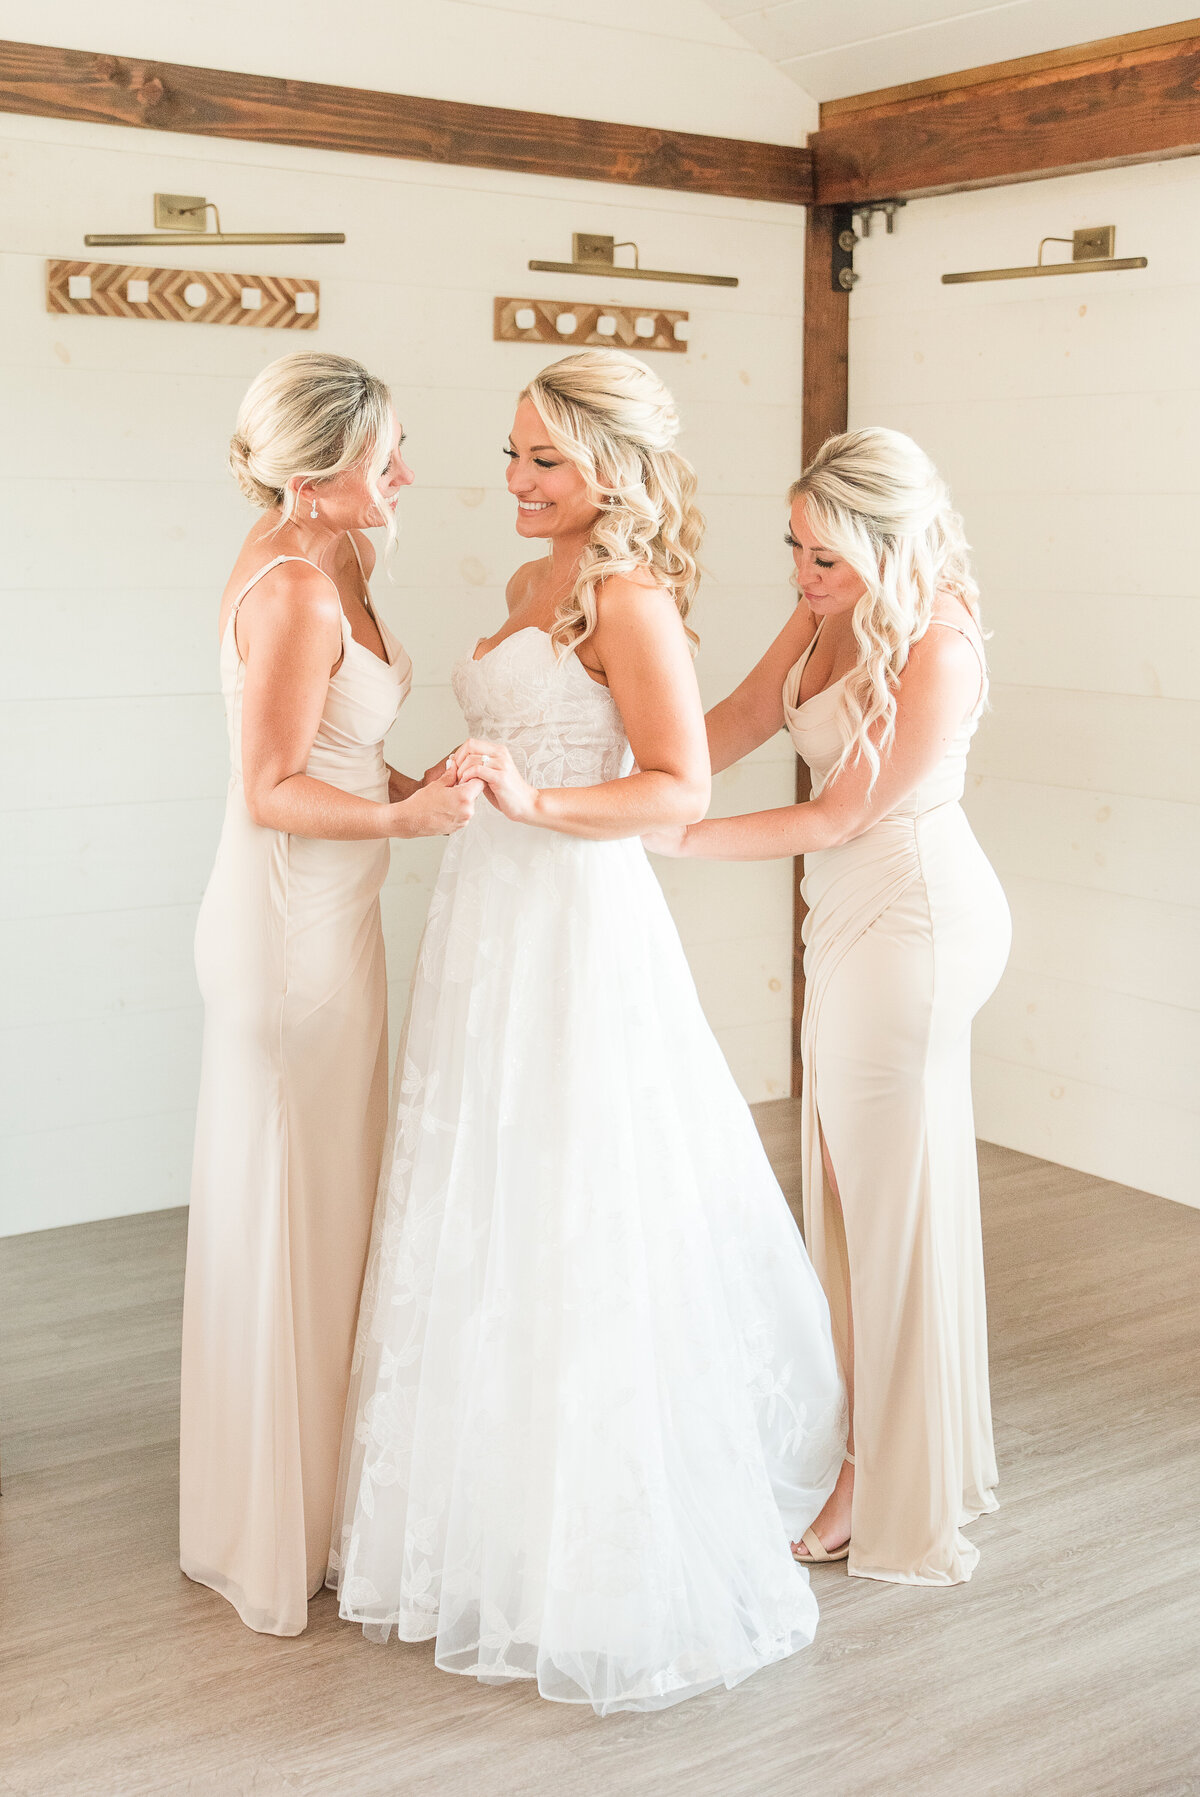 bride and maids of honor at getting reay suite kent island resort